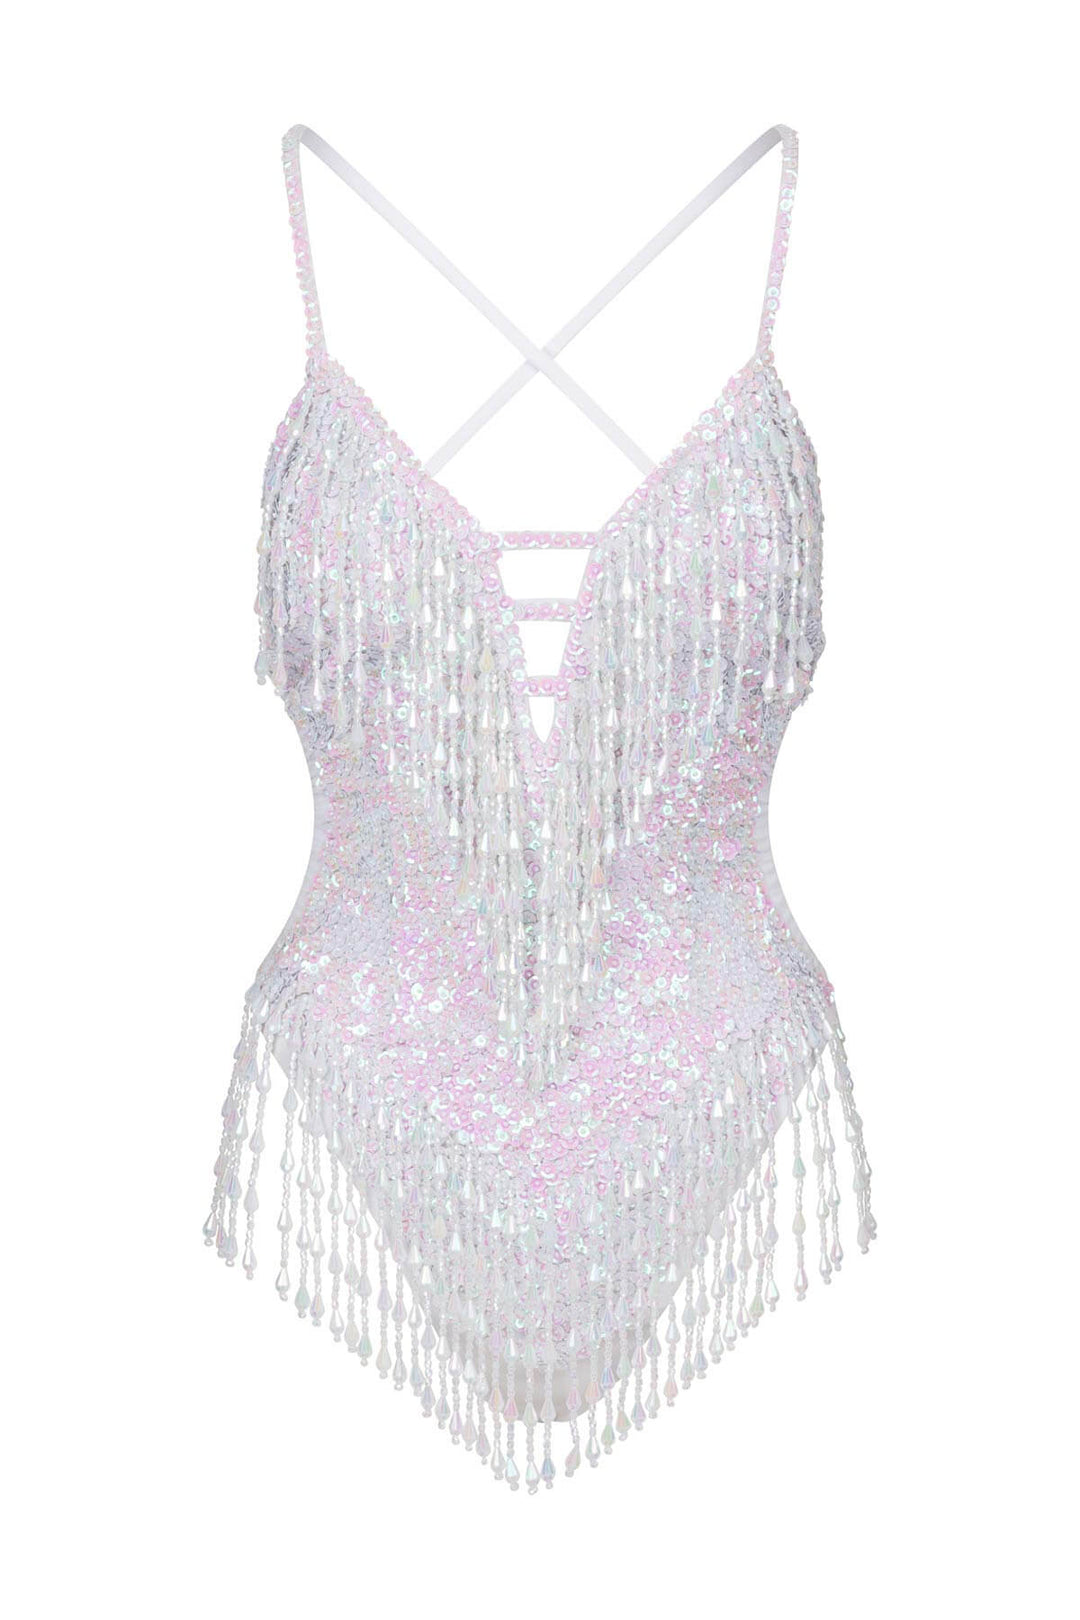 Shimmy Shimmy Iridescent Pearl Sequin Bodysuit - Easy Tiger